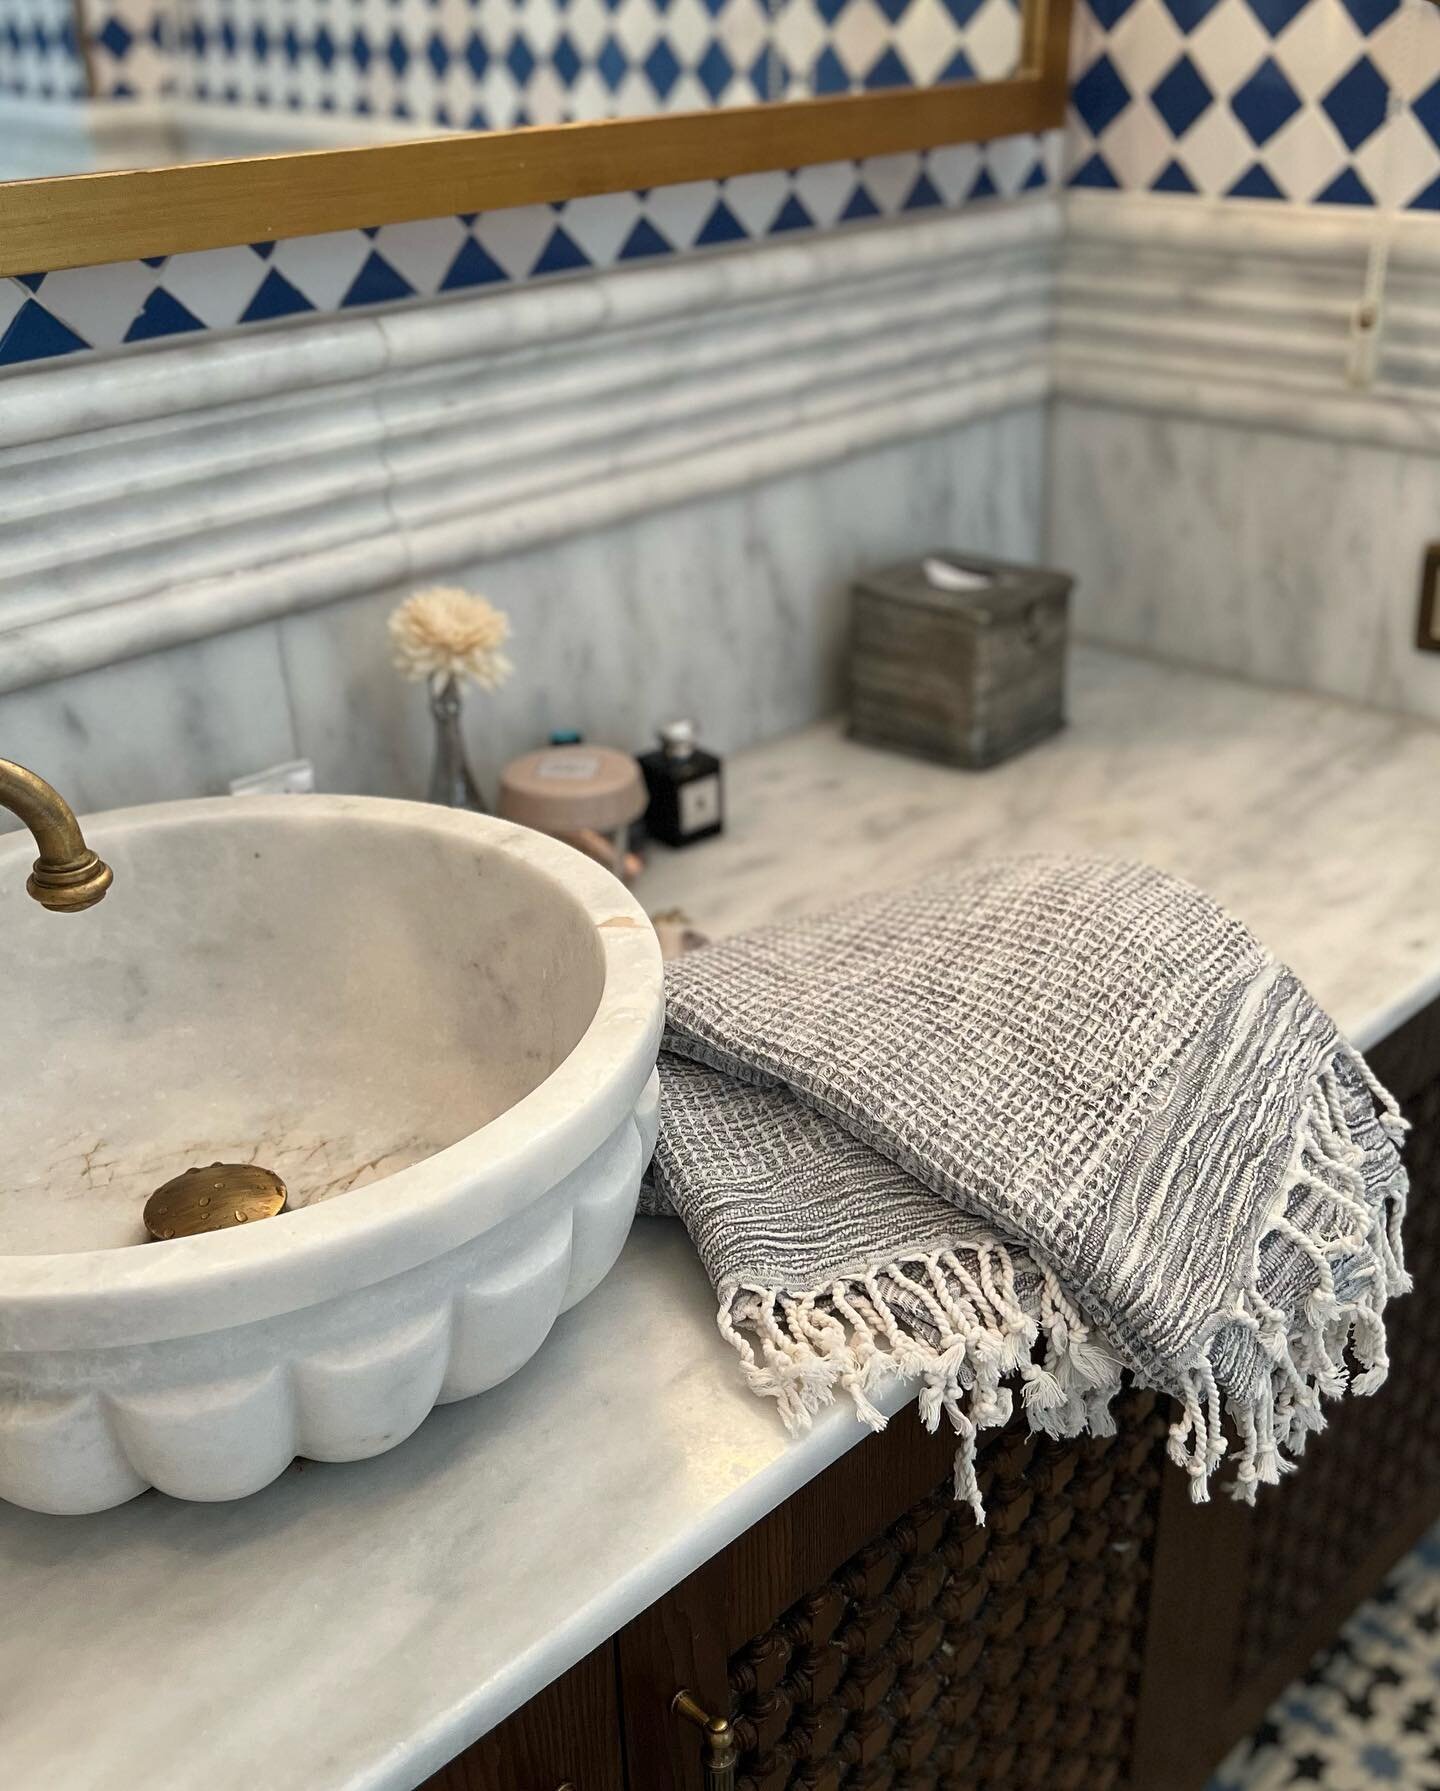 Our new waffle weave collection is cushiony soft and super absorbent. With all of the beautiful colors we have, as well as crisp white, your bathroom will look and feel like a luxurious spa. 🛁 🧖🏼&zwj;♀️
.
.
.
.
.
#turkishtowel #spa #bath #bathesse